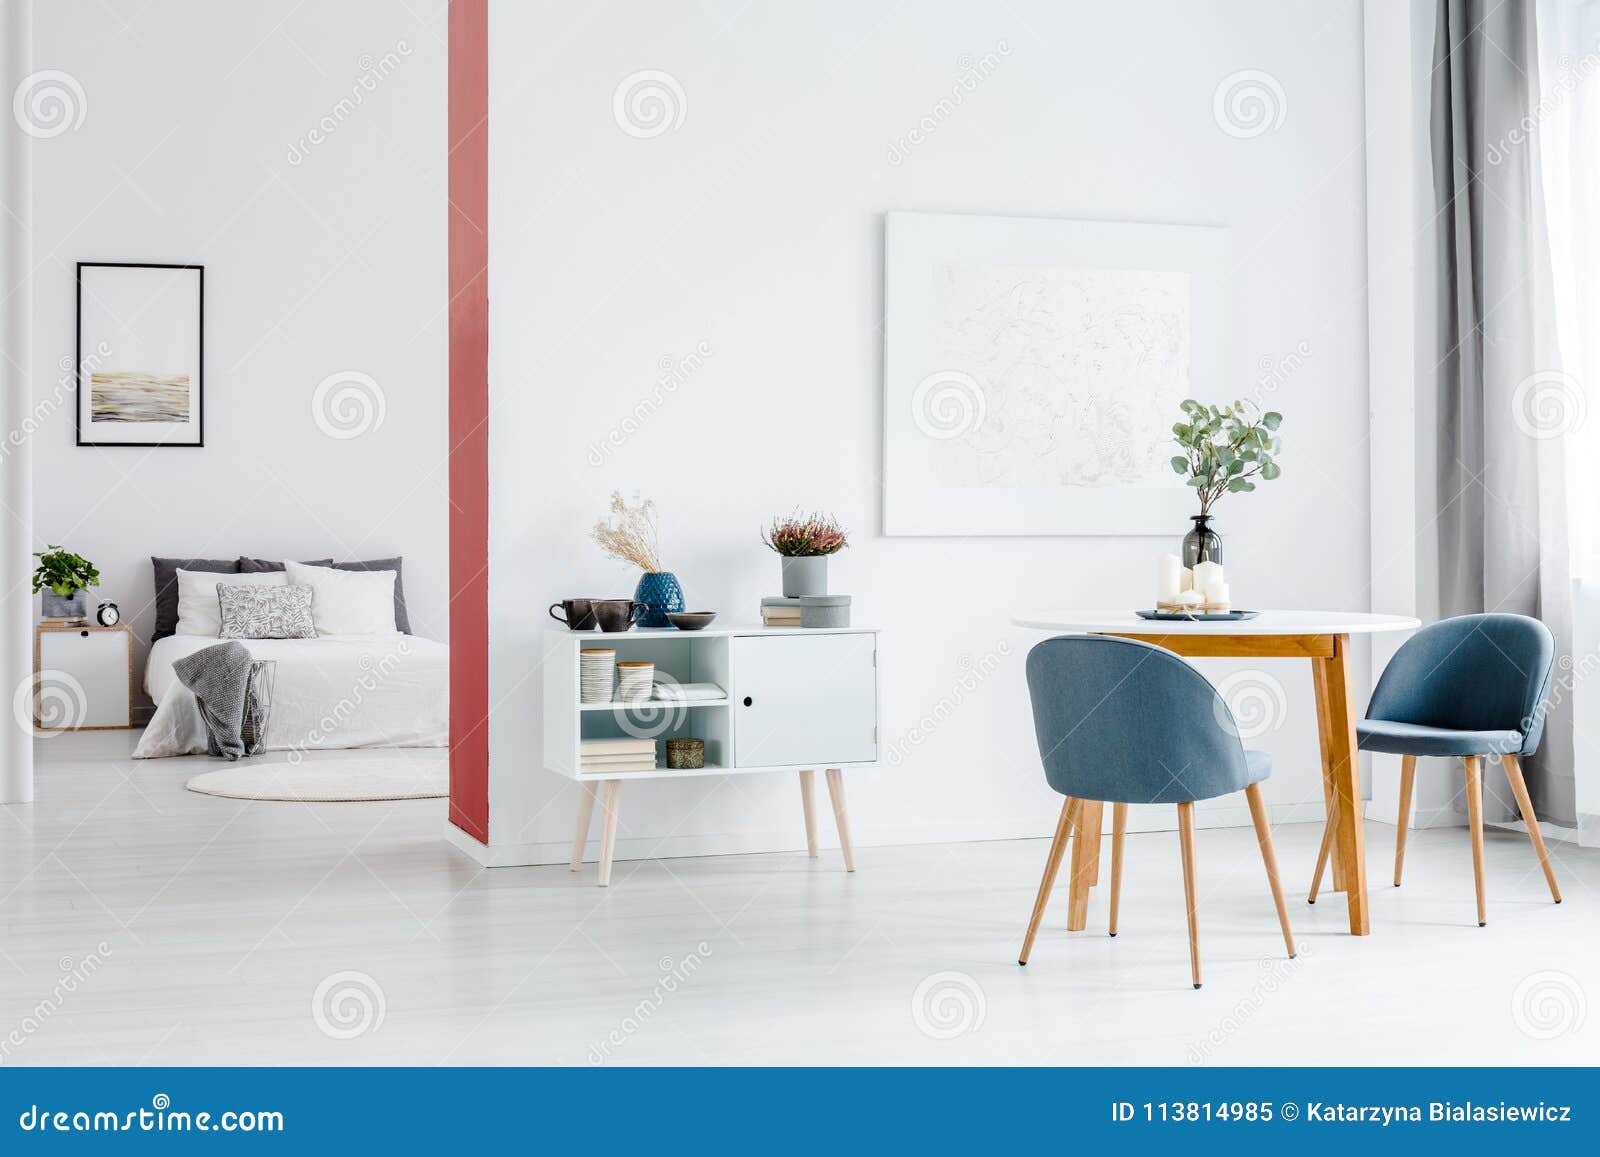 Wall Separating Open Space Interior Stock Image Image Of